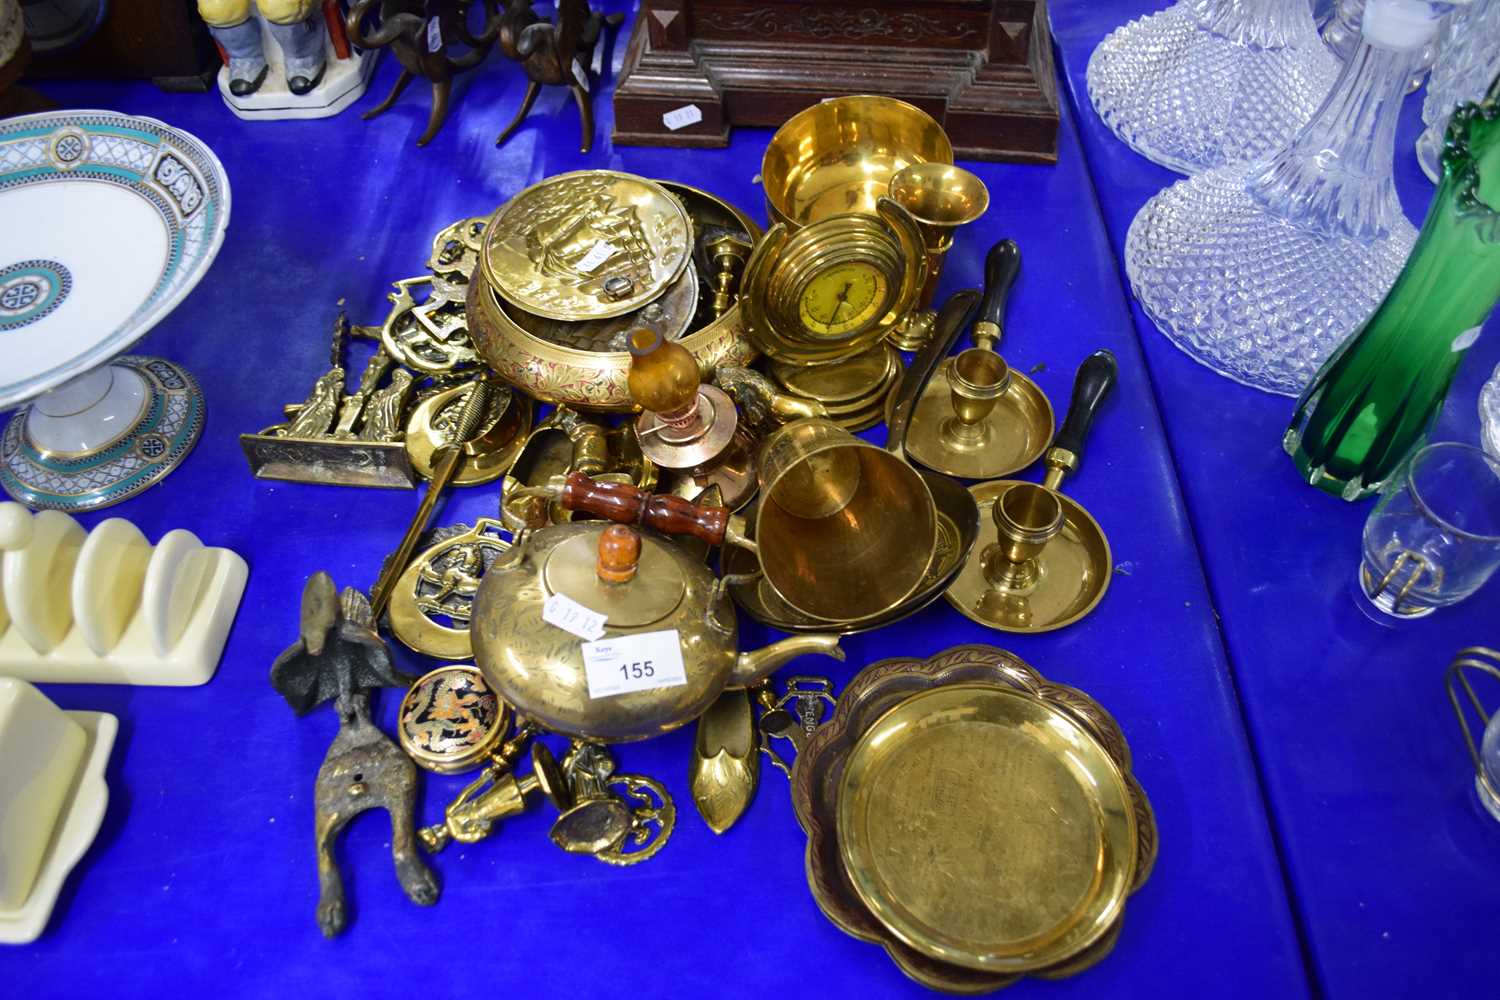 VARIOUS SMALL BRASS DISHES, CANDLESTICKS, ORNAMENTS ETC